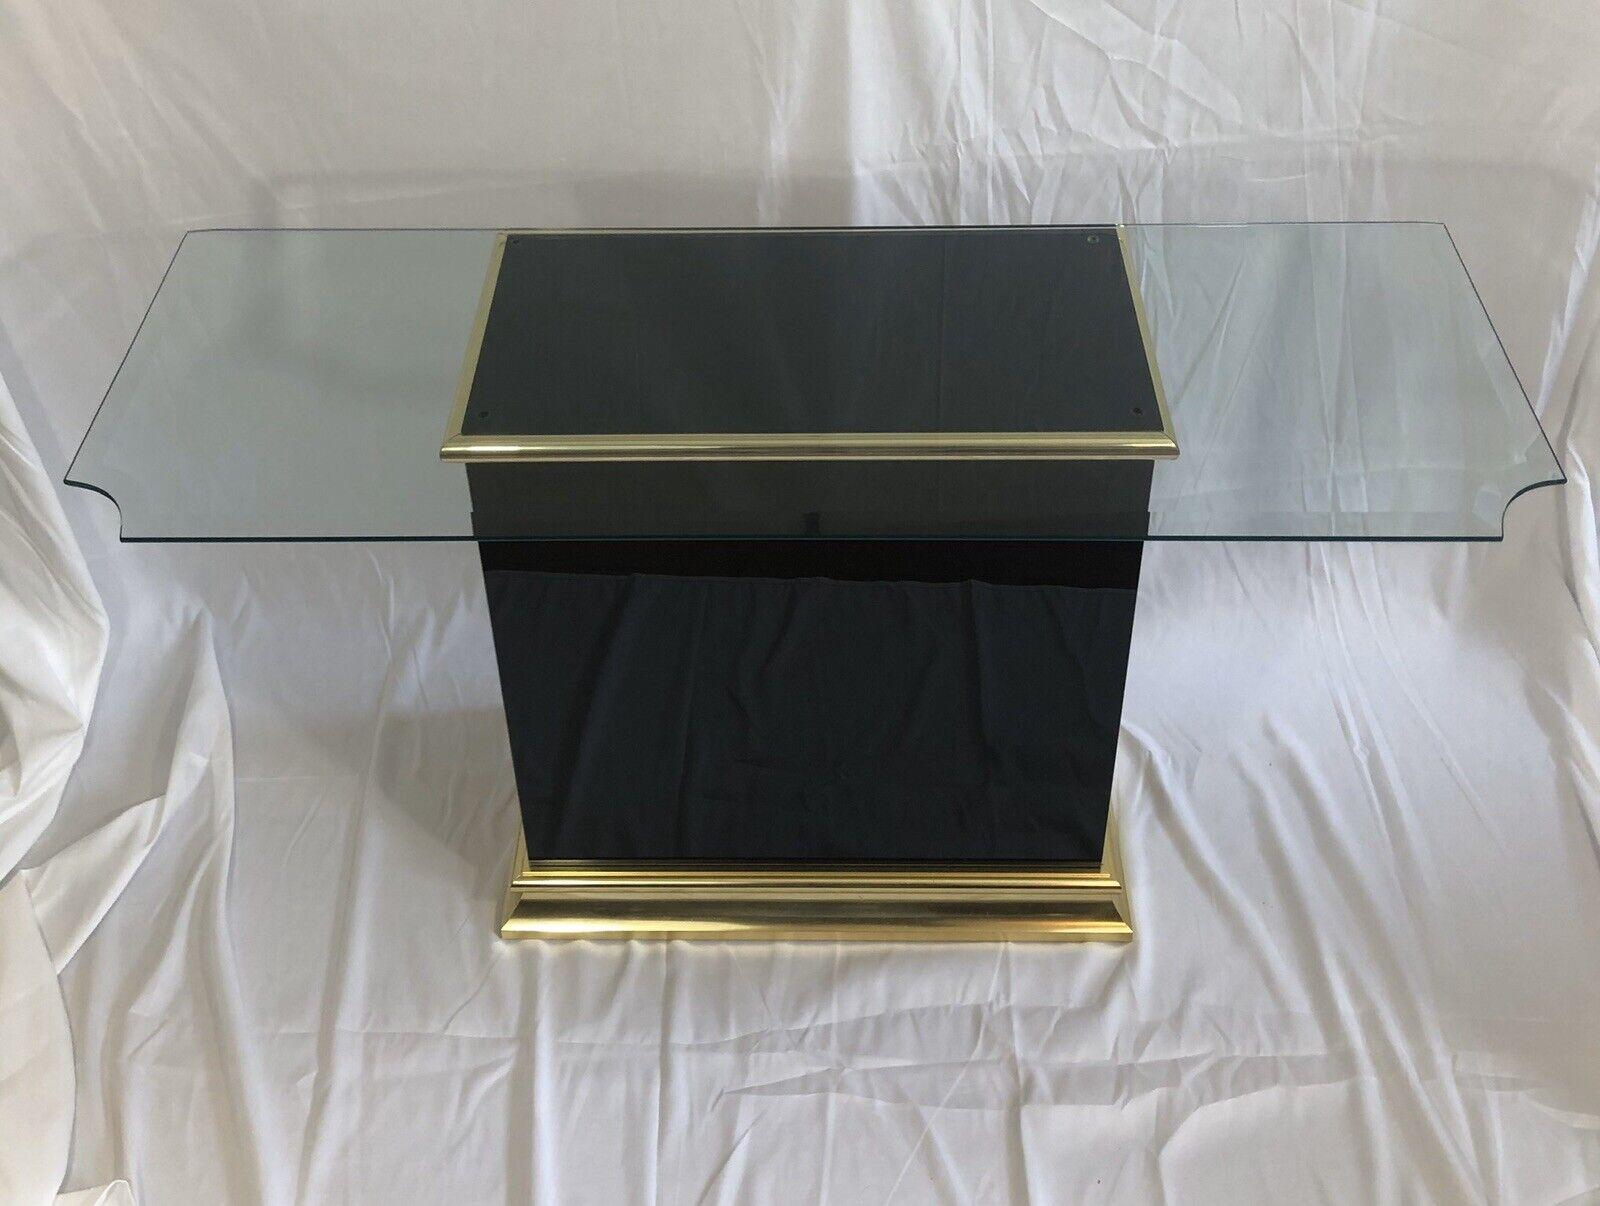 Stunning black glass console table with polishes brass trim. Beveled glass top with notched corners for a sophisticated profile. 3/4 finish.
Base measures:
27.5T x 25.25W x 14D
Glass measures
50x18
Curbside to NYC/Philly available $300.